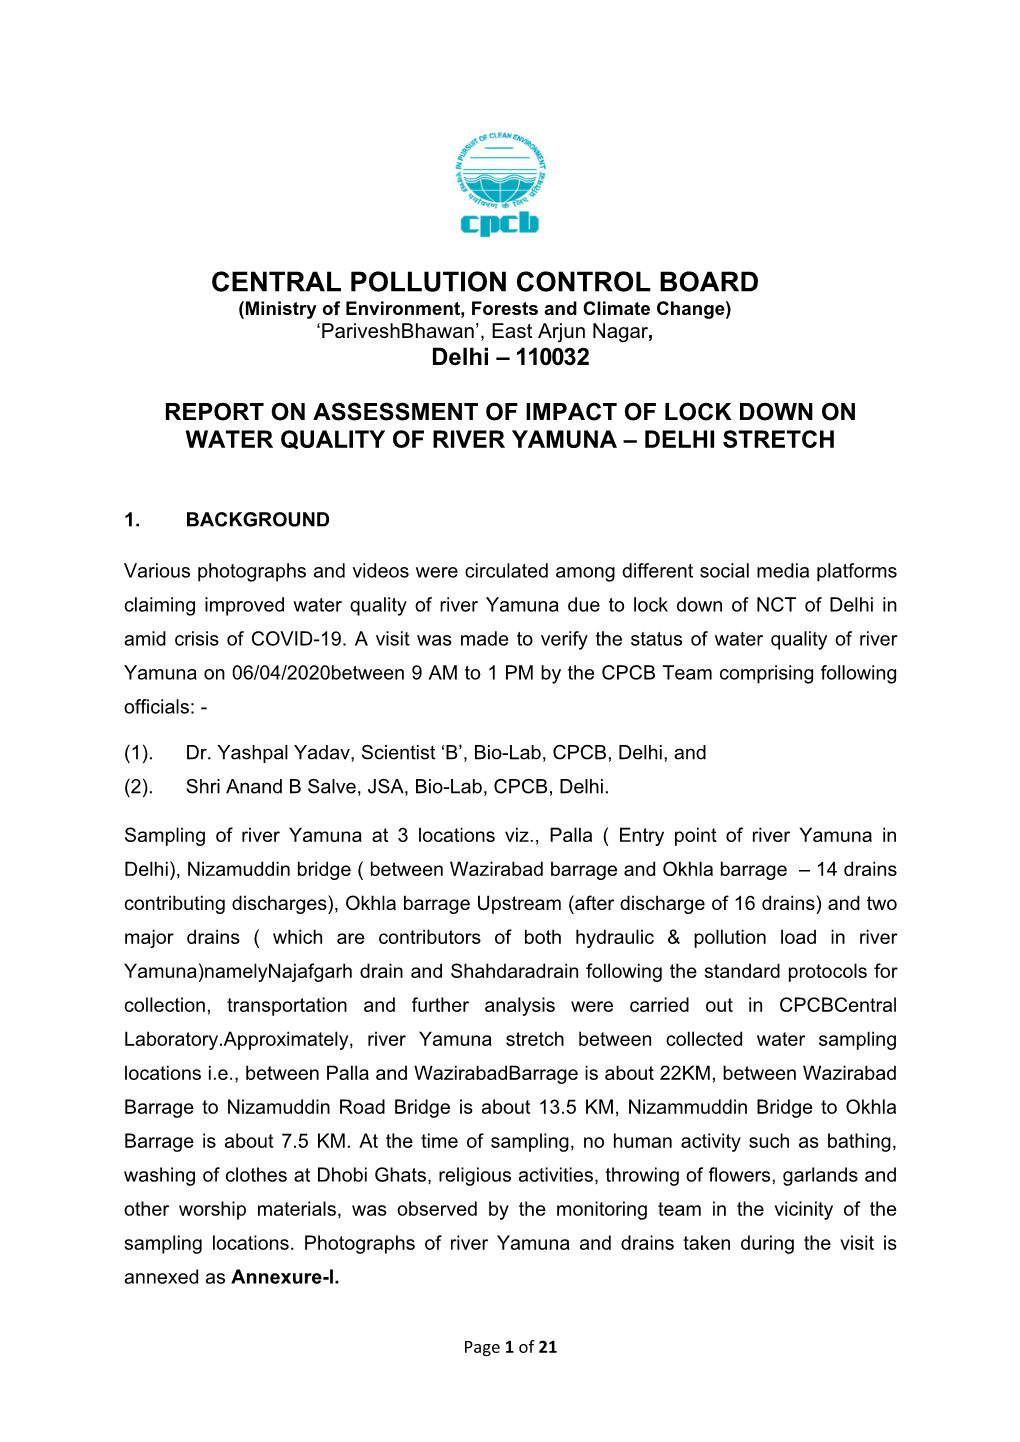 CENTRAL POLLUTION CONTROL BOARD (Ministry of Environment, Forests and Climate Change) ‘Pariveshbhawan’, East Arjun Nagar, Delhi – 110032